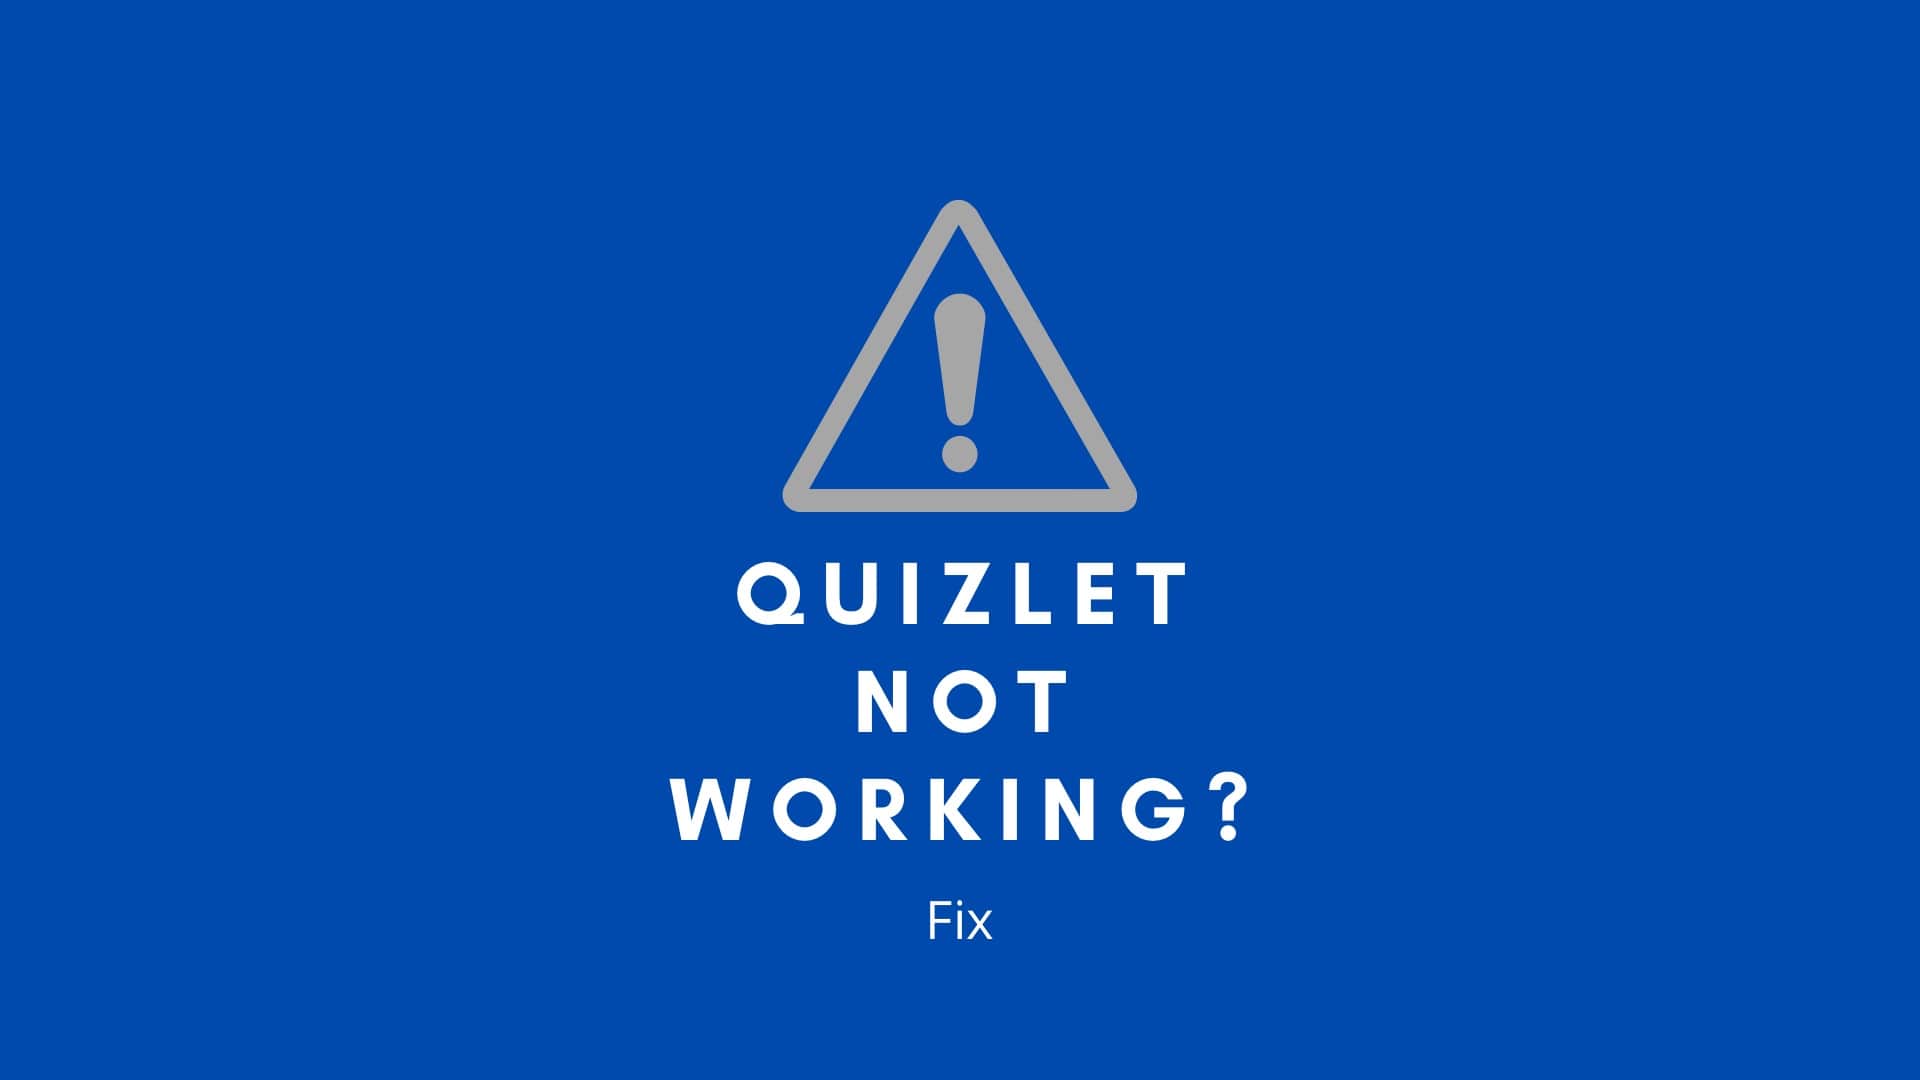 Why Quizlet not working